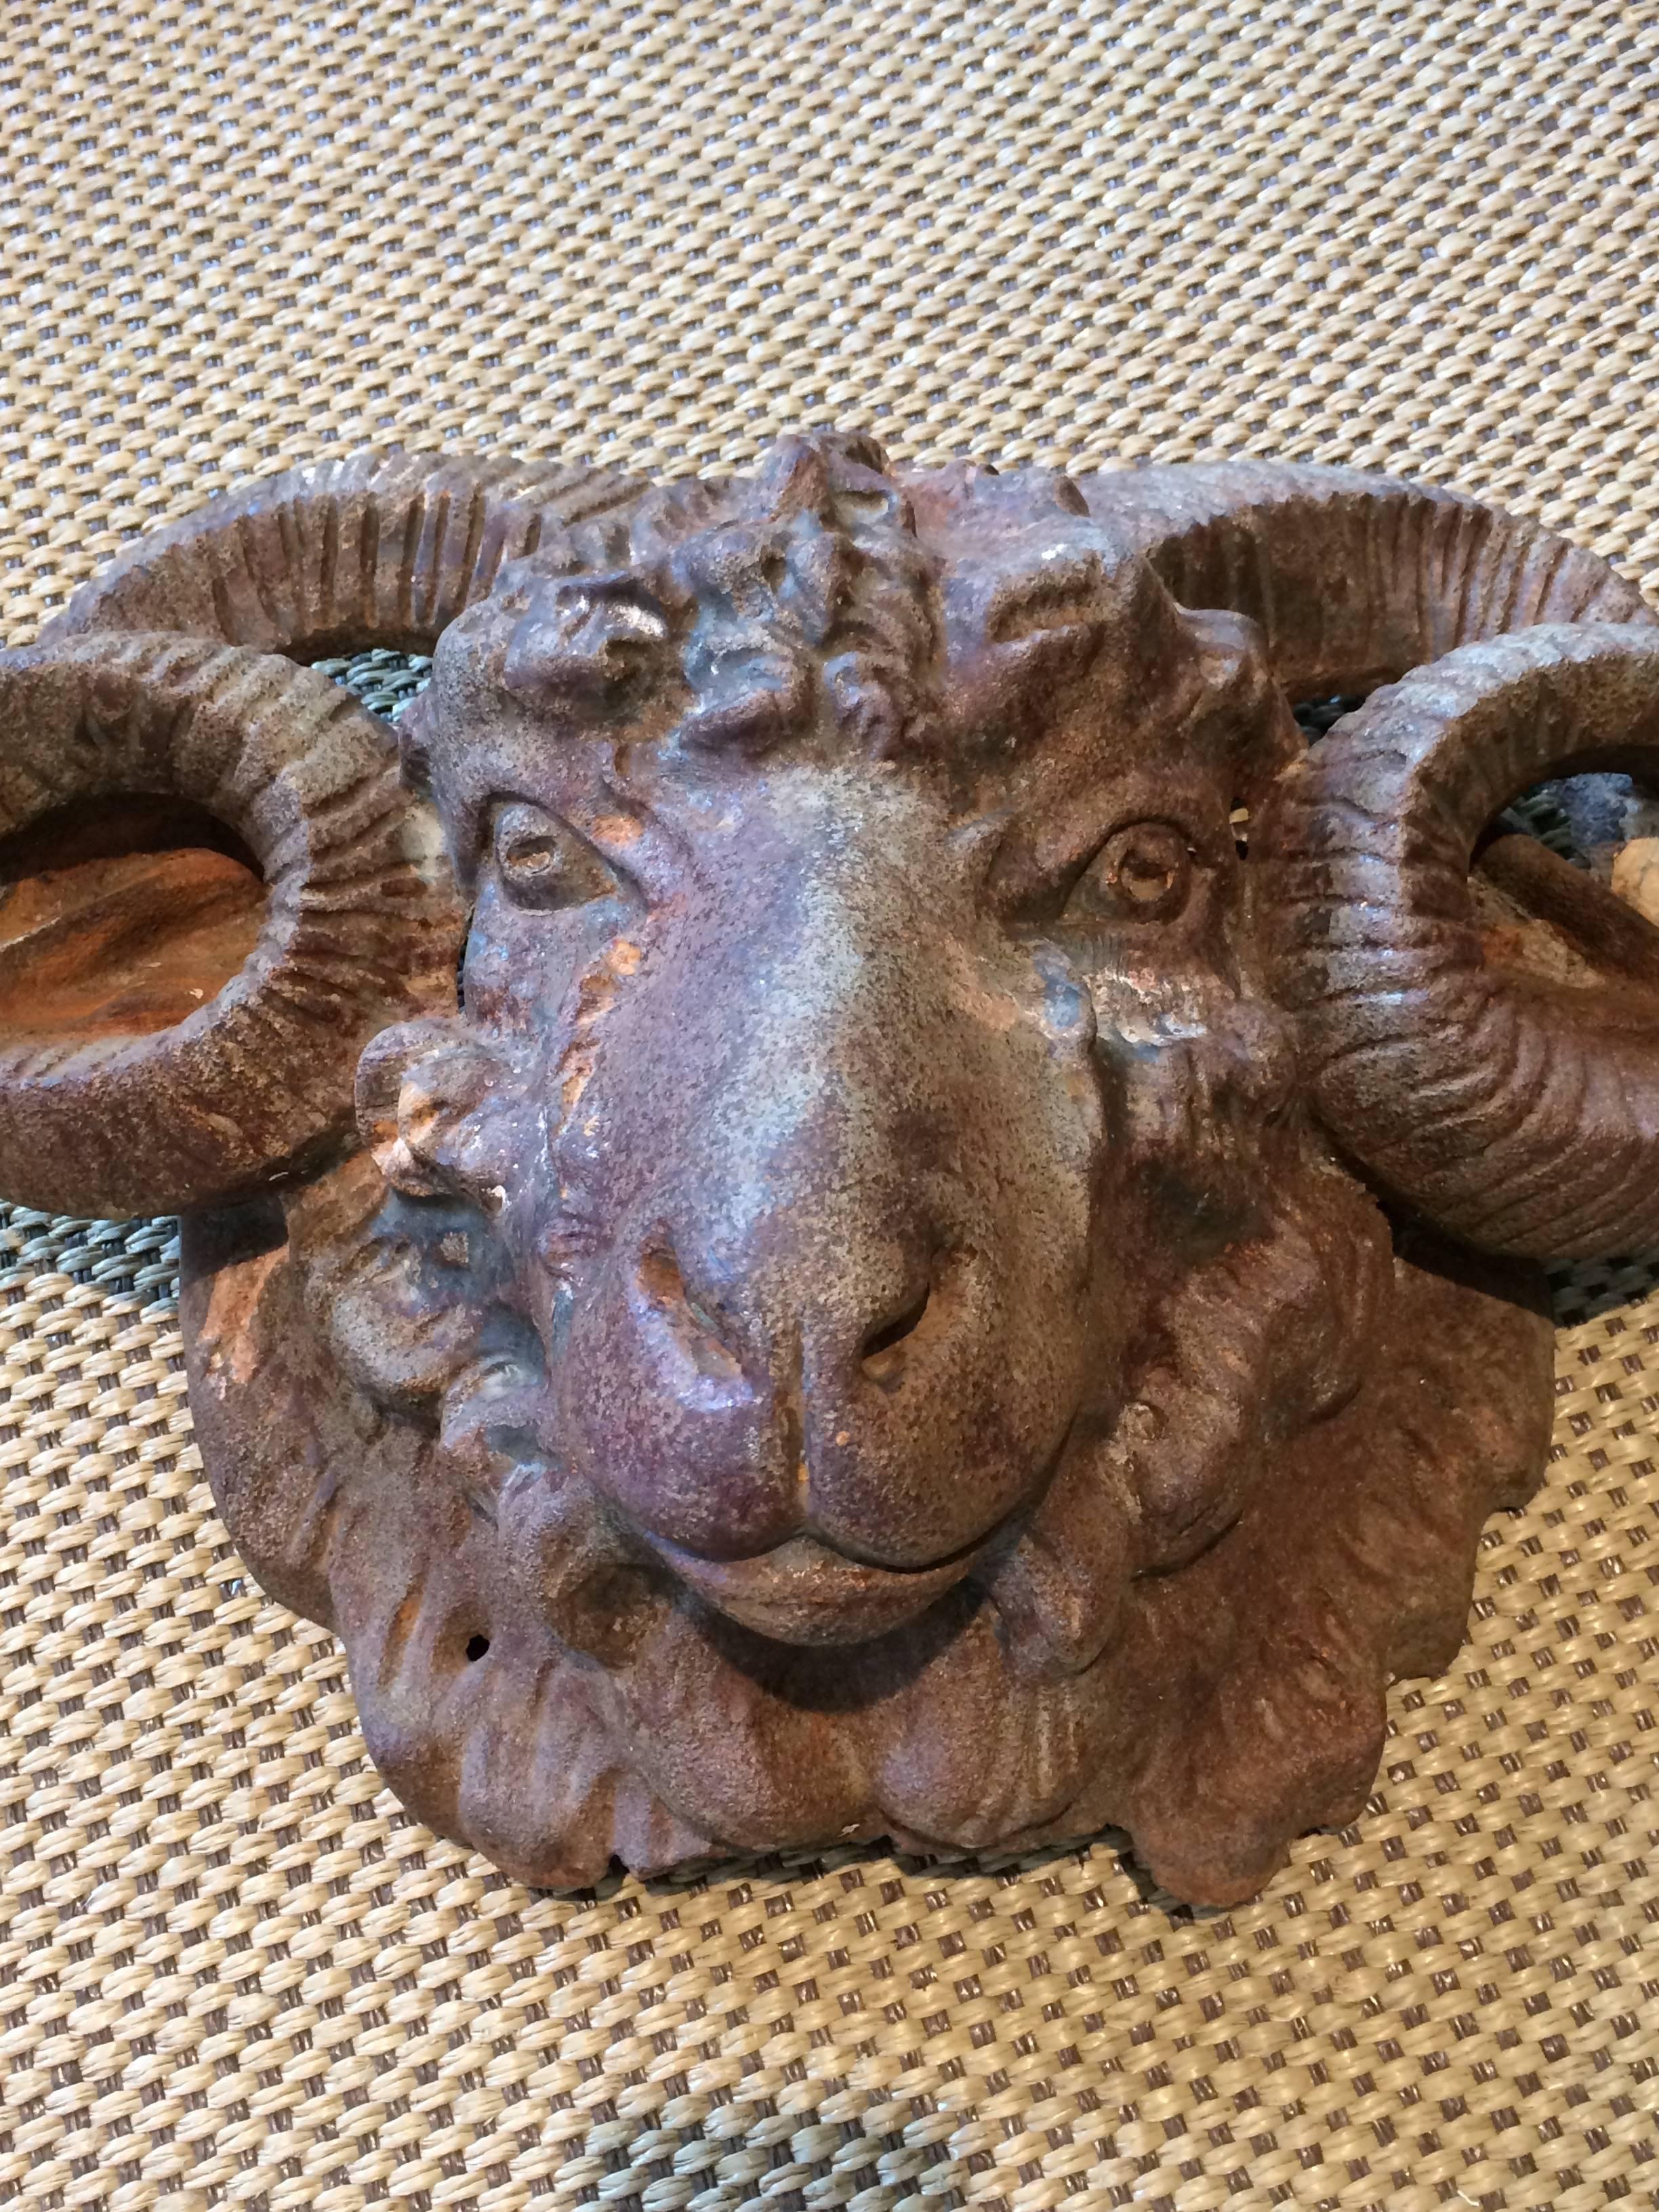 A very impressive heavy iron found object in the shape of a handsome ram's head with a natural aged rust colored patina.